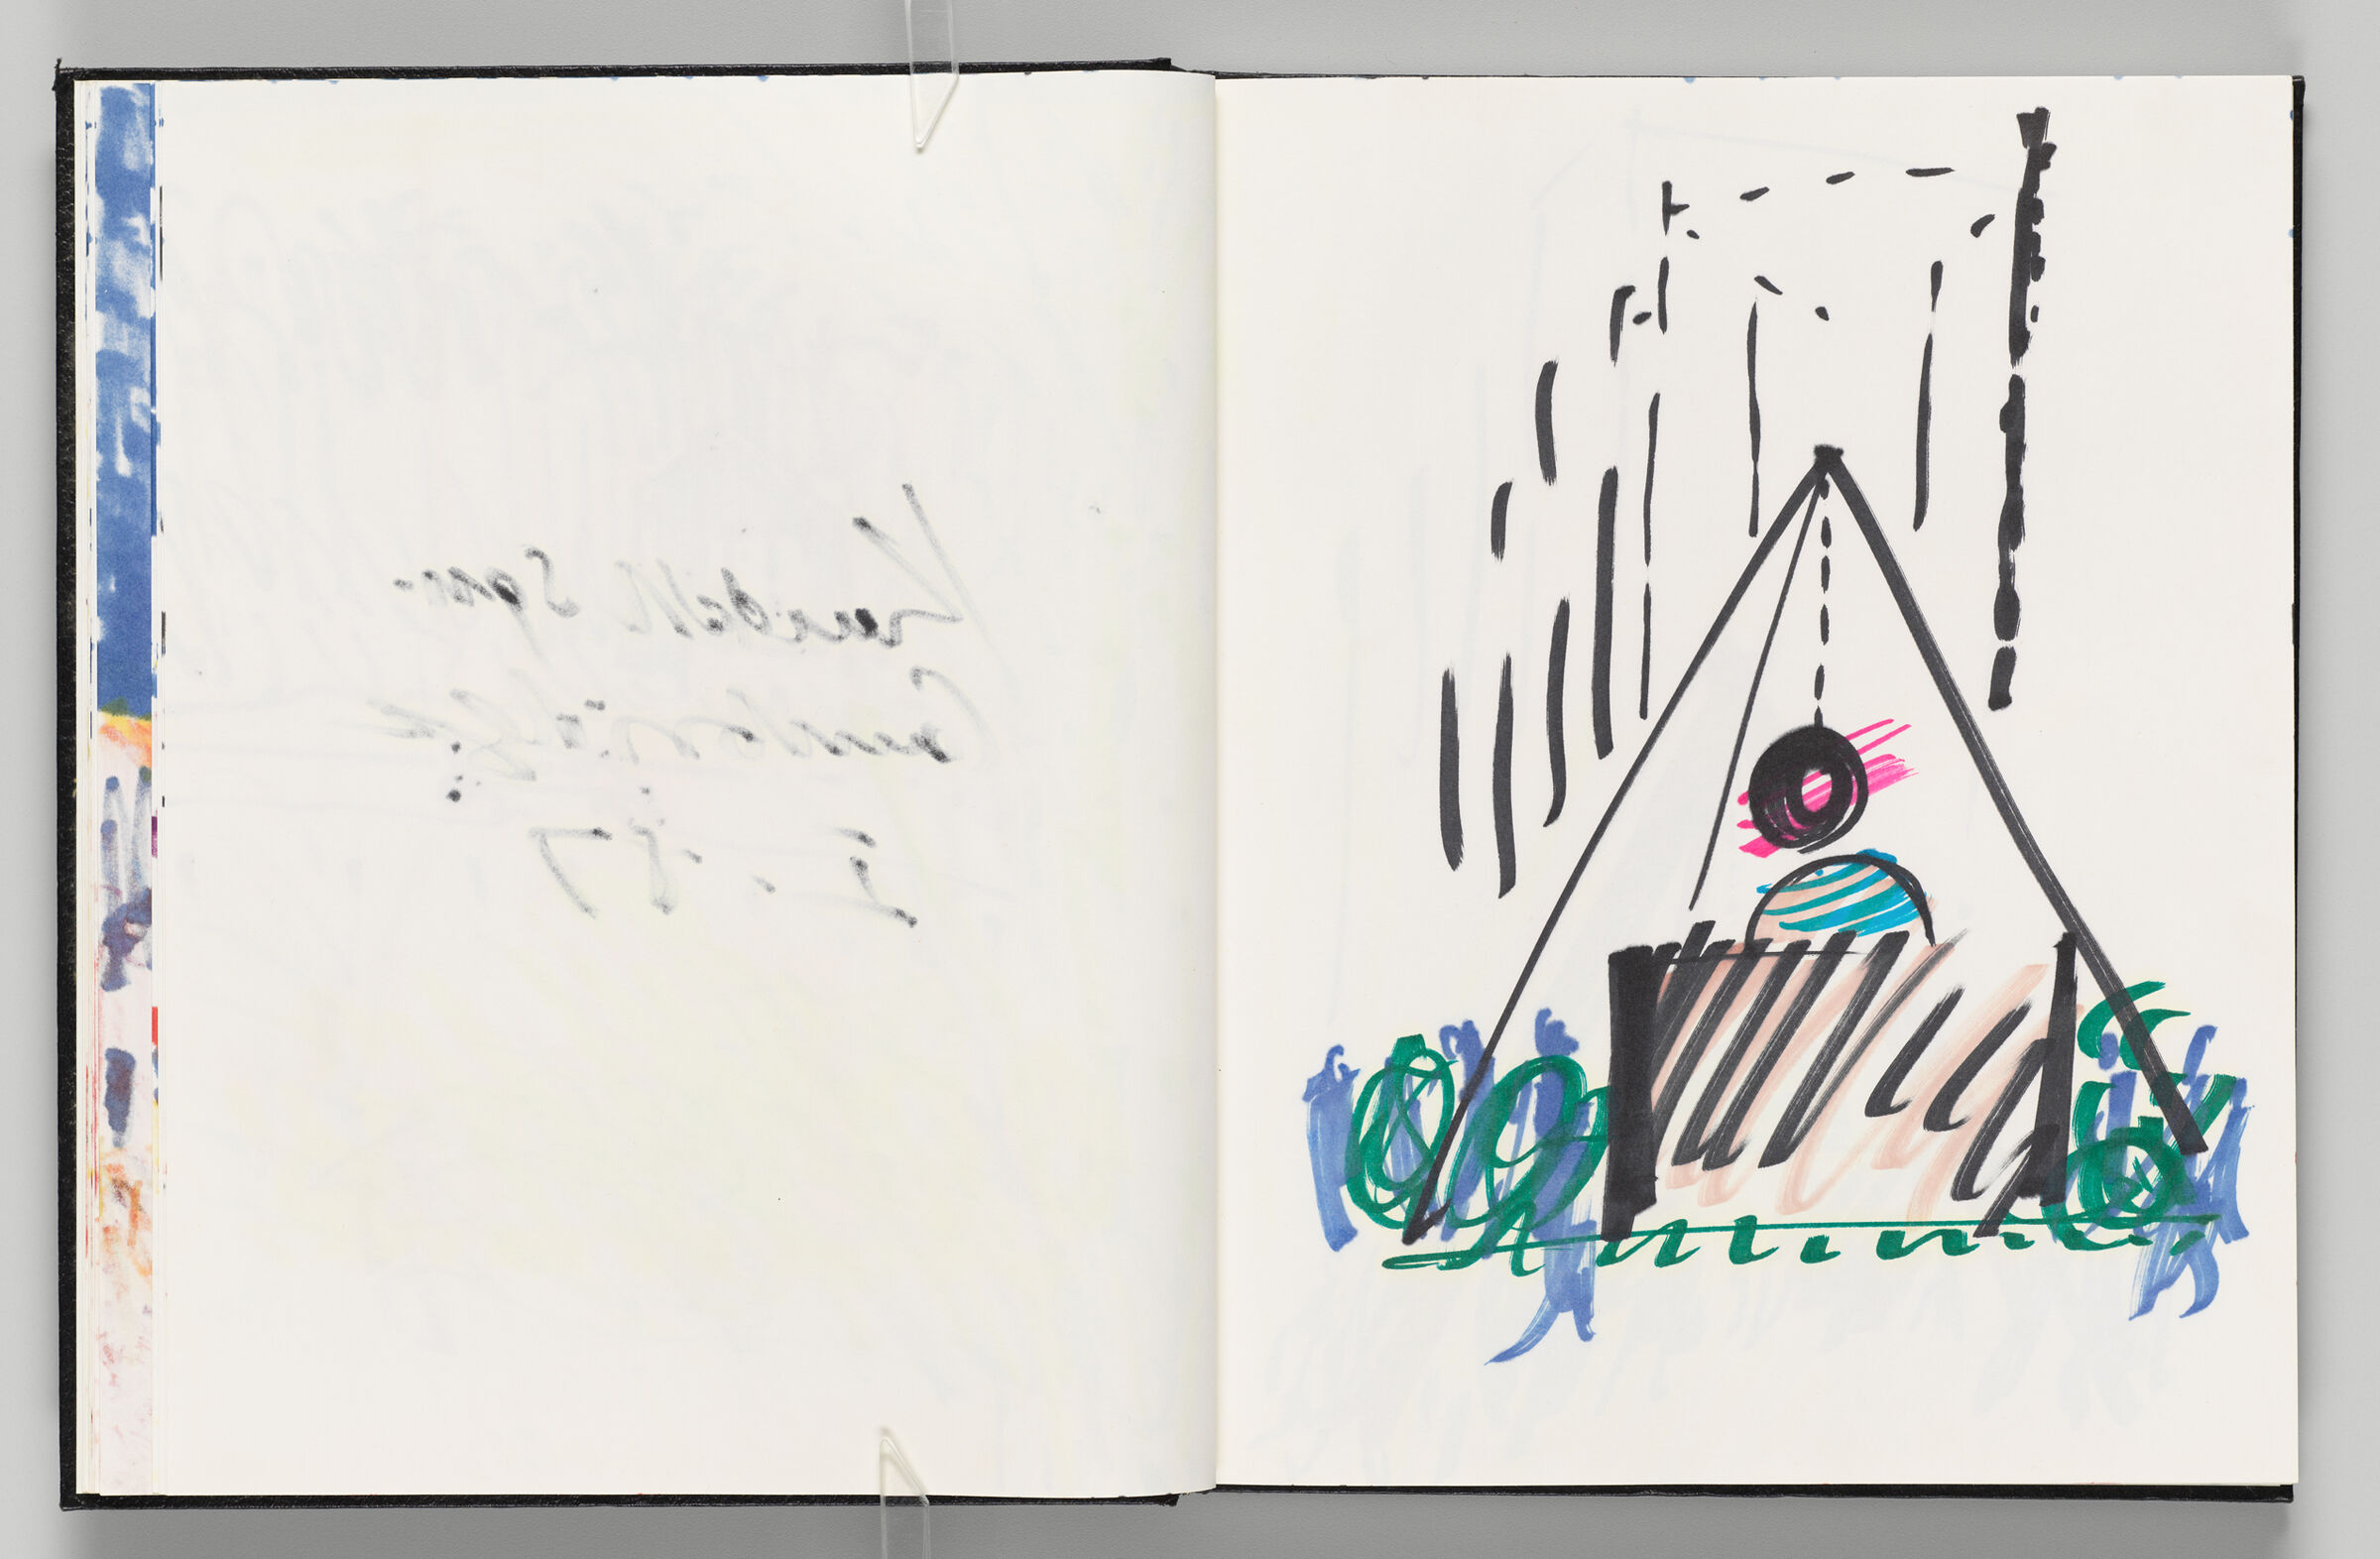 Untitled (Bleed-Through Of Previous Page, Left Page); Untitled (Design For Light Work, Right Page)